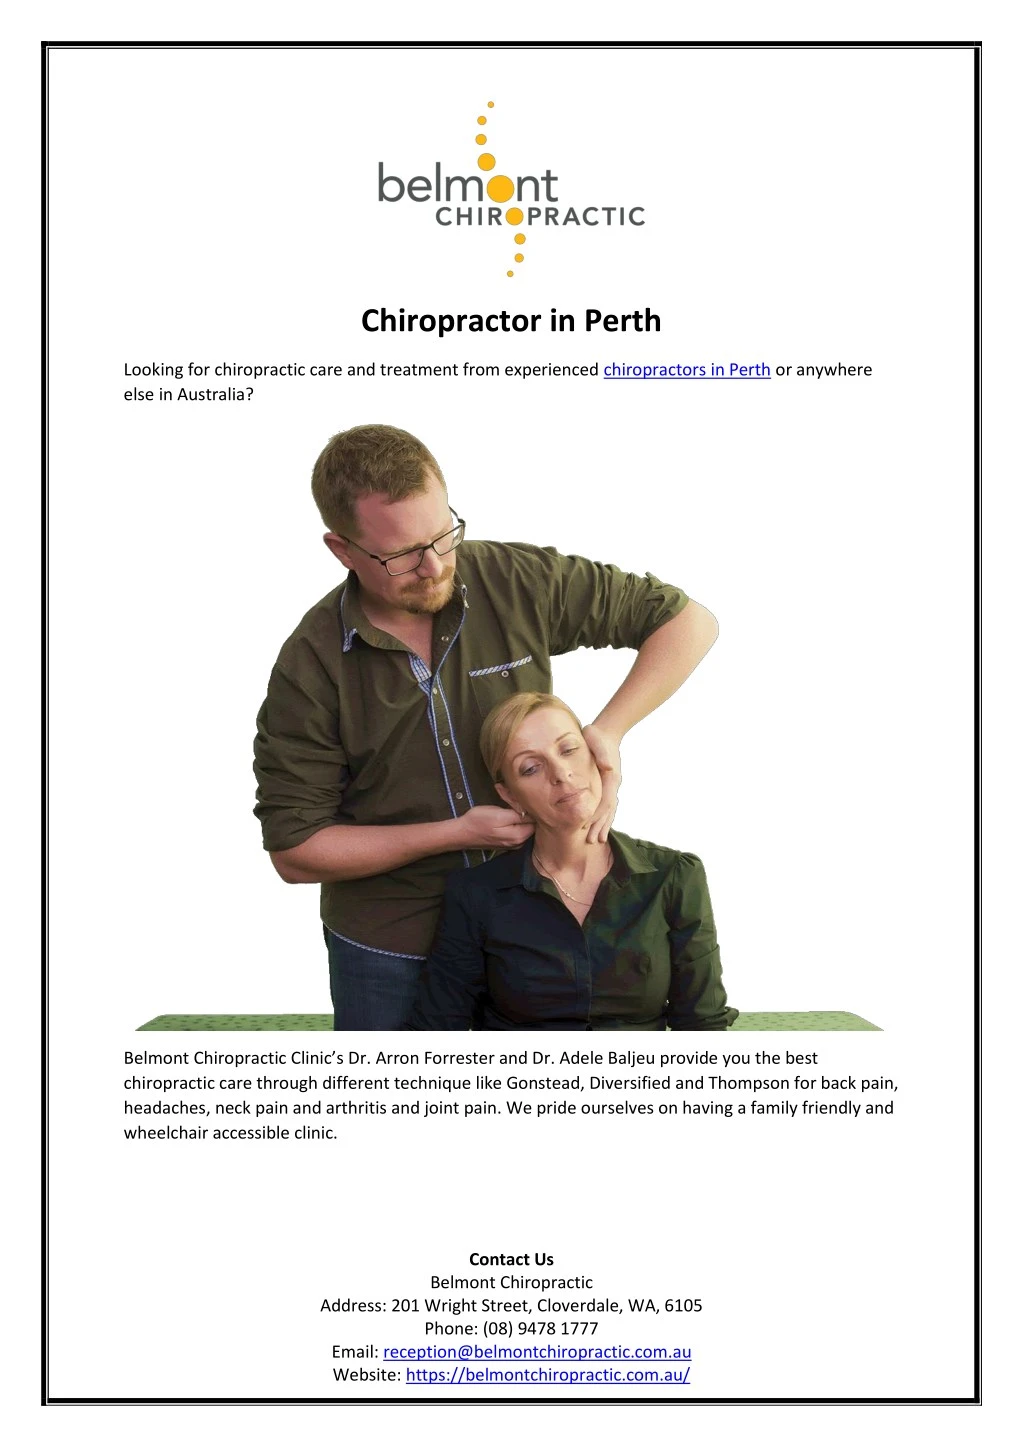 chiropractor in perth